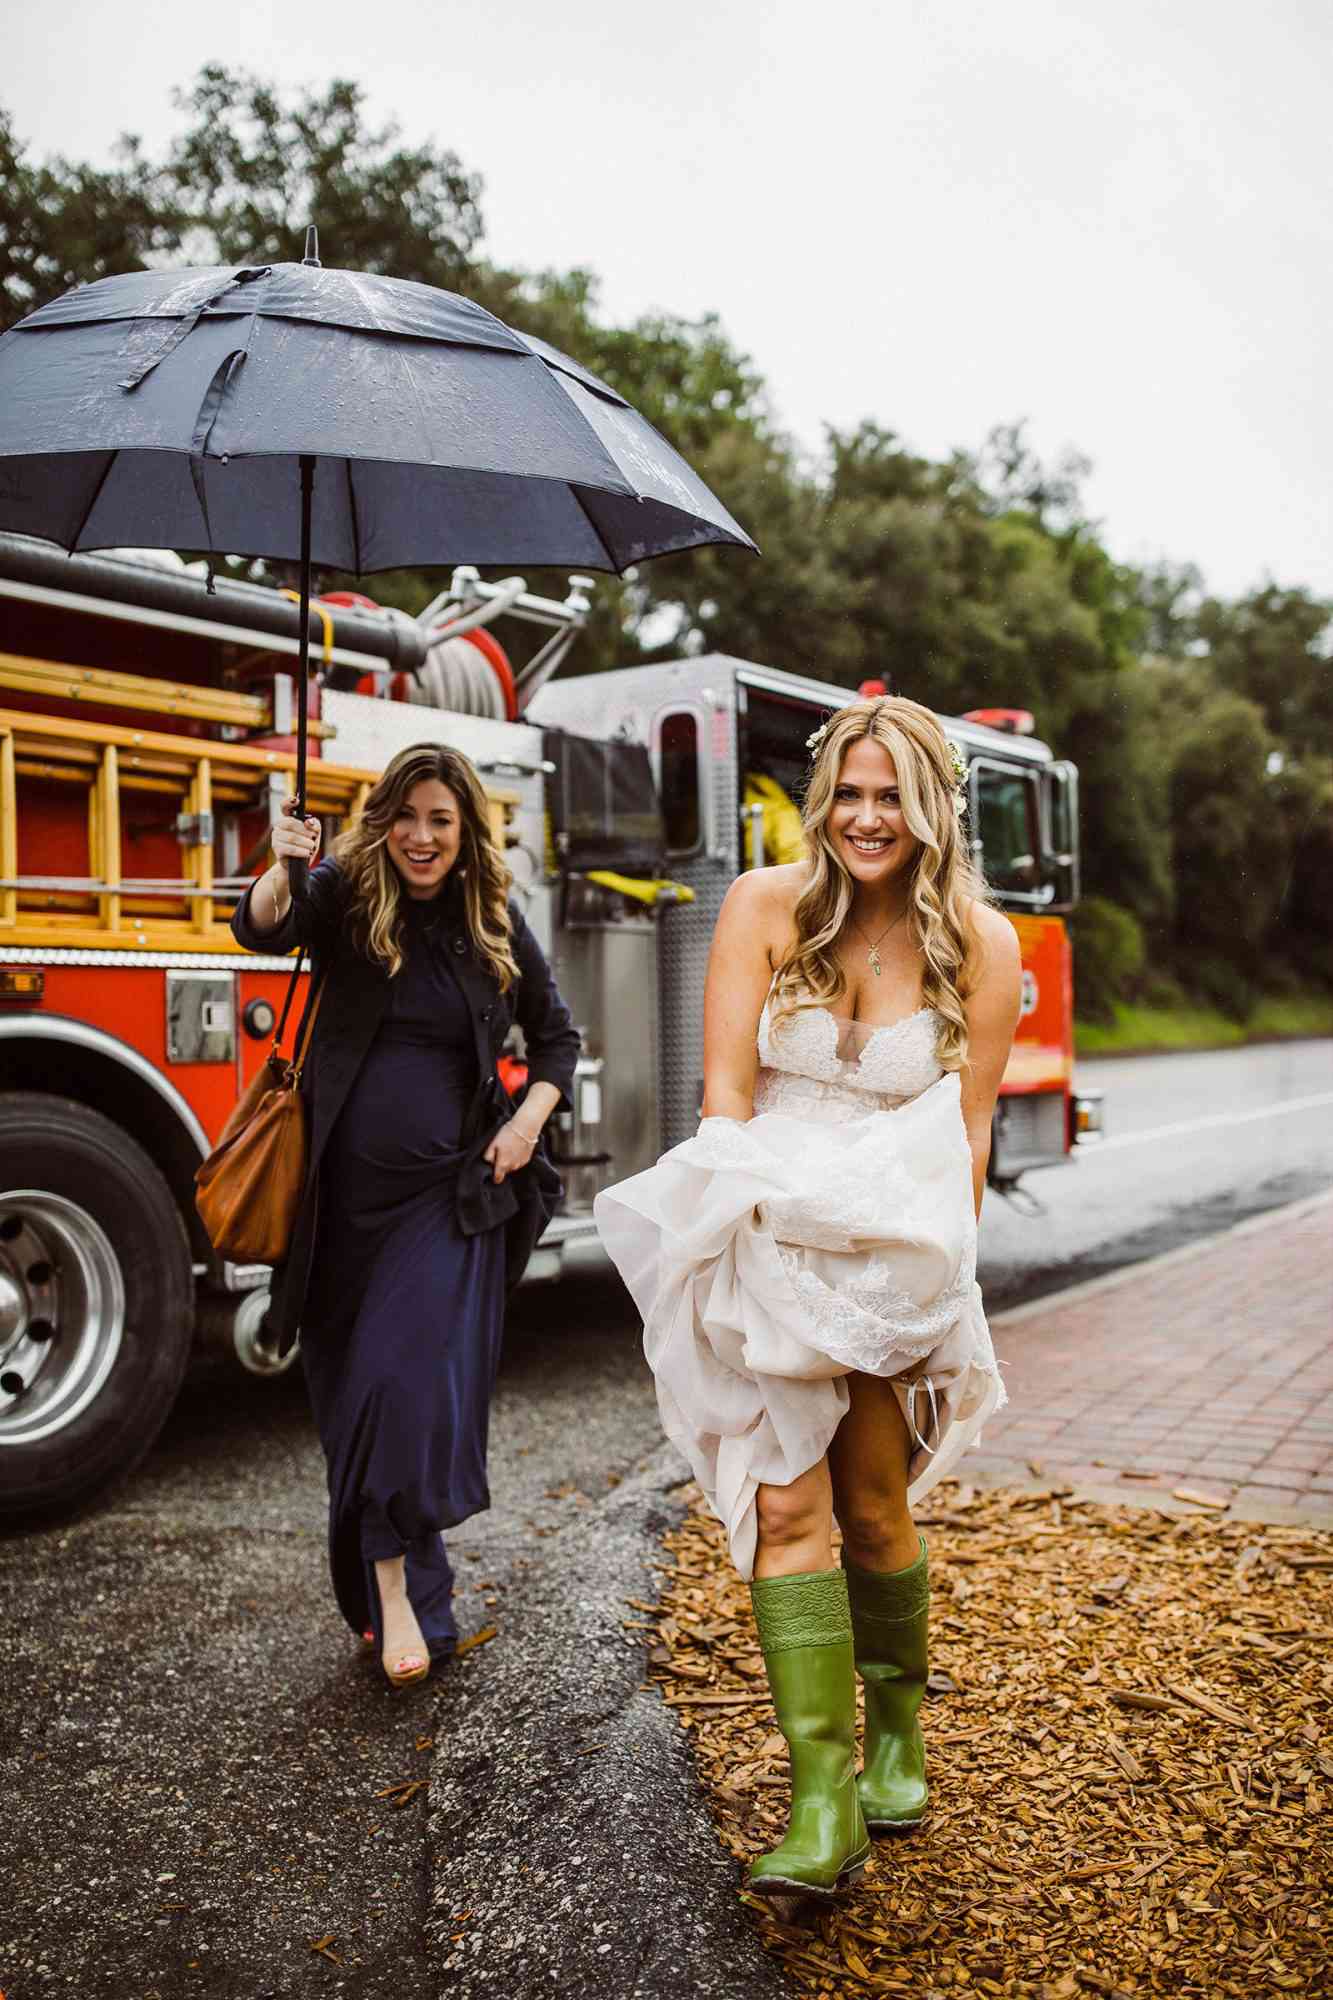 Firefighters Help Stranded Bride - Julie and Geof's wedding day - firefighters escorting Julie to wedding venue at the 1909 in Topanga Canyon